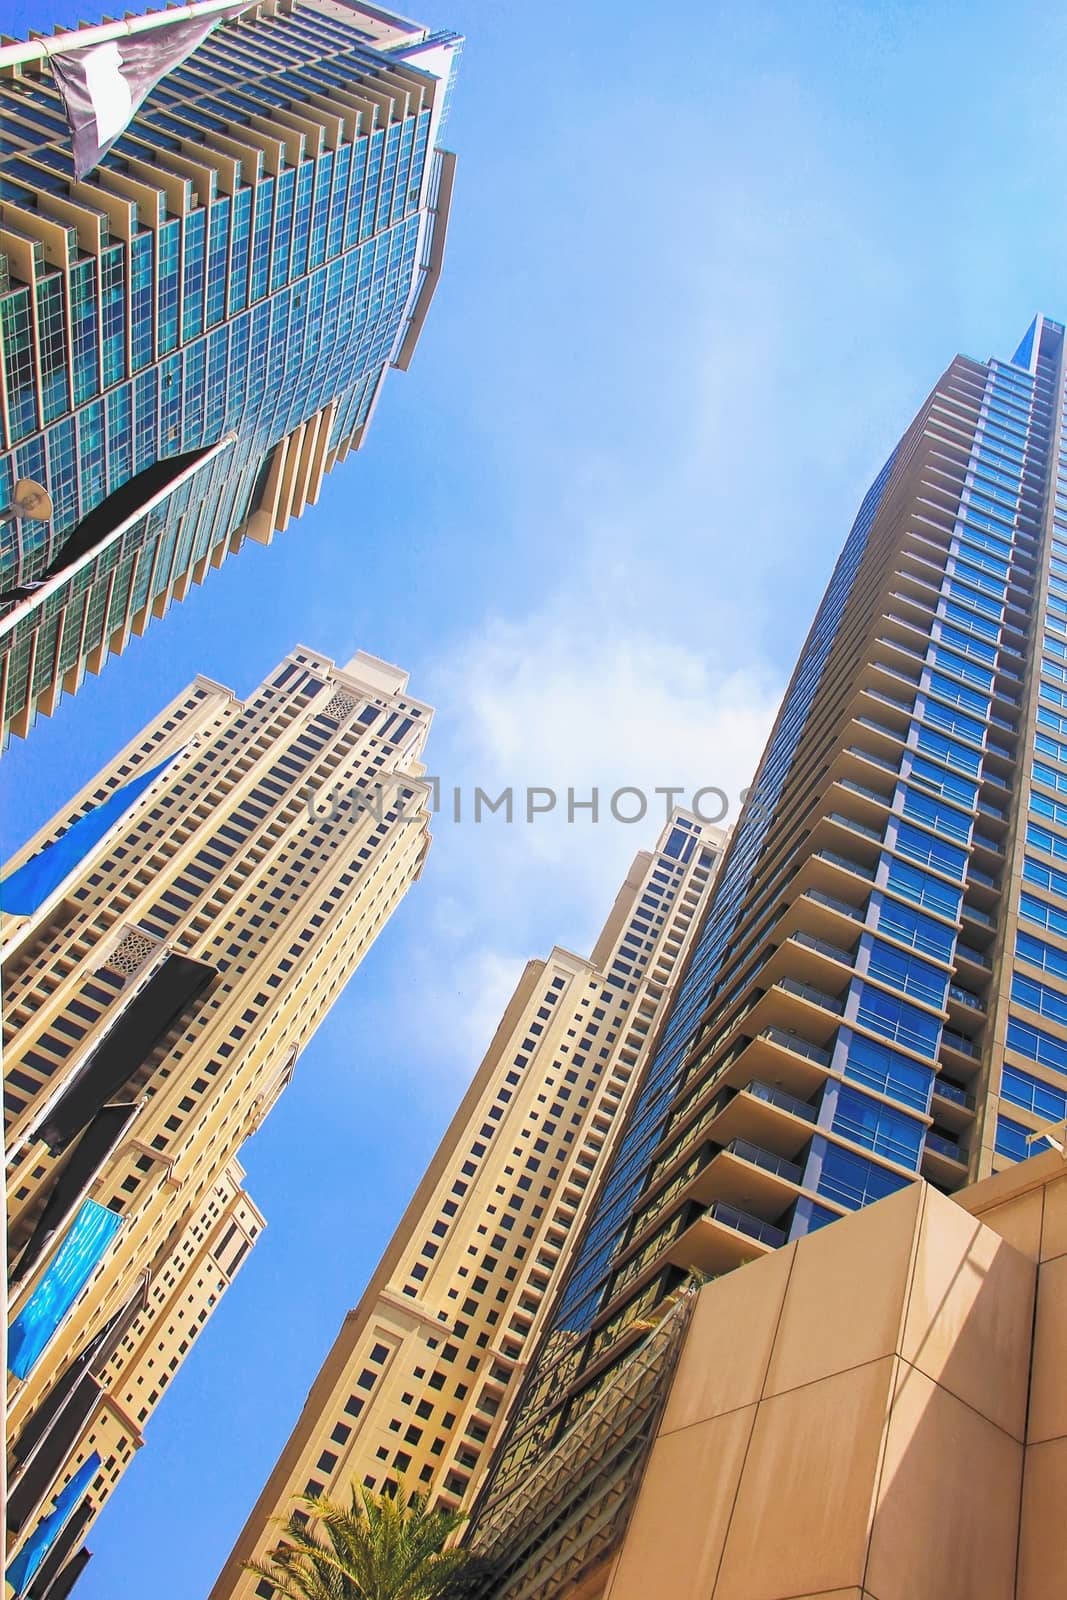 United Arab Emirates Dubai April 7, 2014, skyscrapers high rise buildings view from below against the blue sky modern architecture soft focus